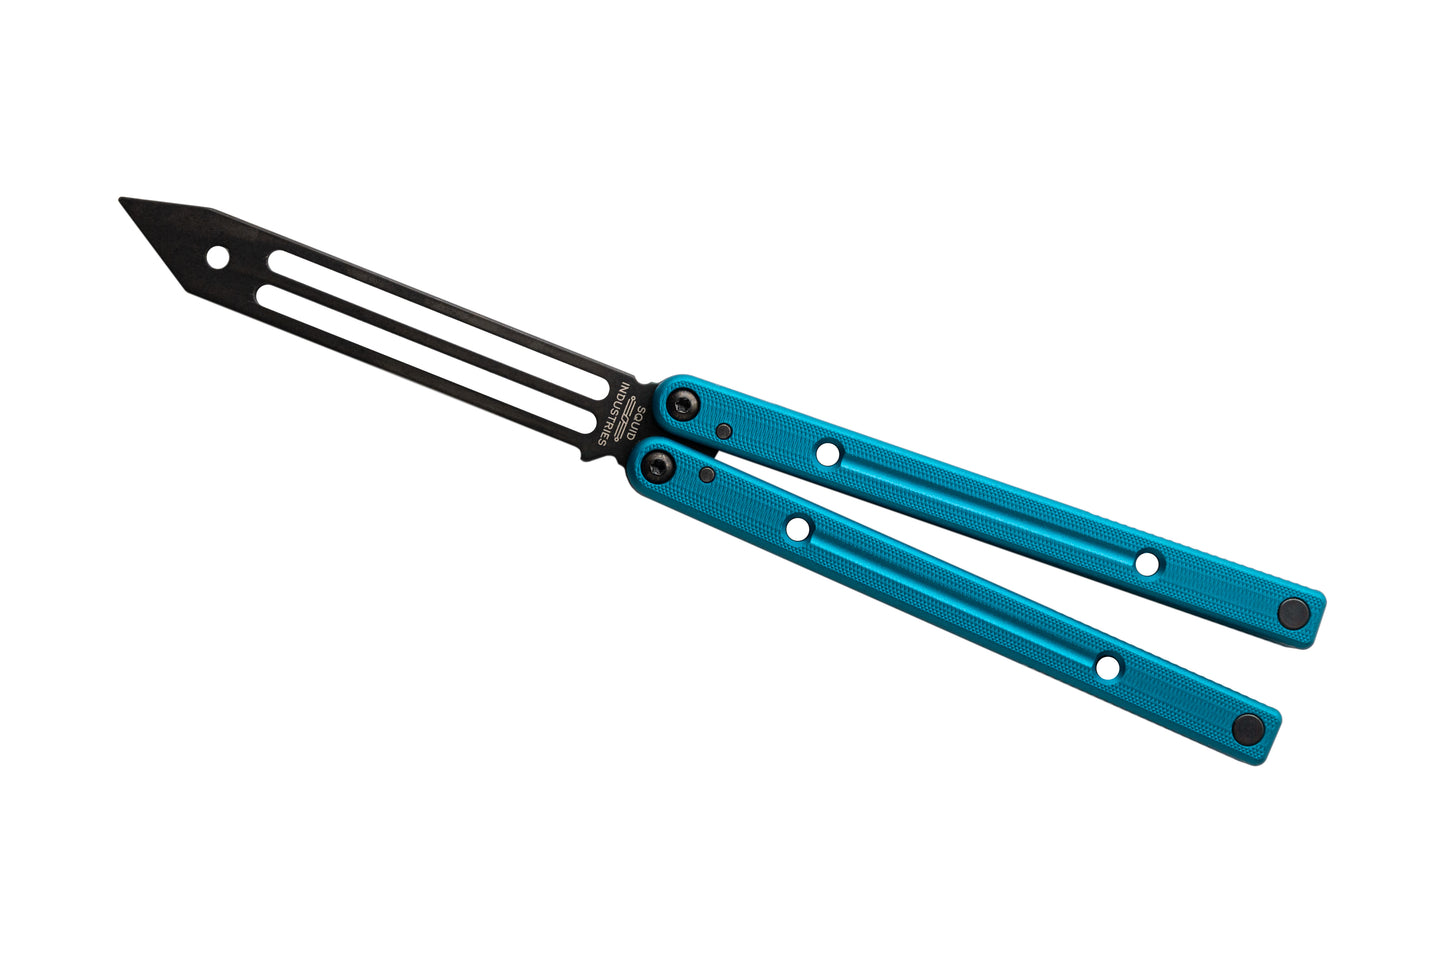 teal inked squidtrainer v4 butterfly knife trainer balisong